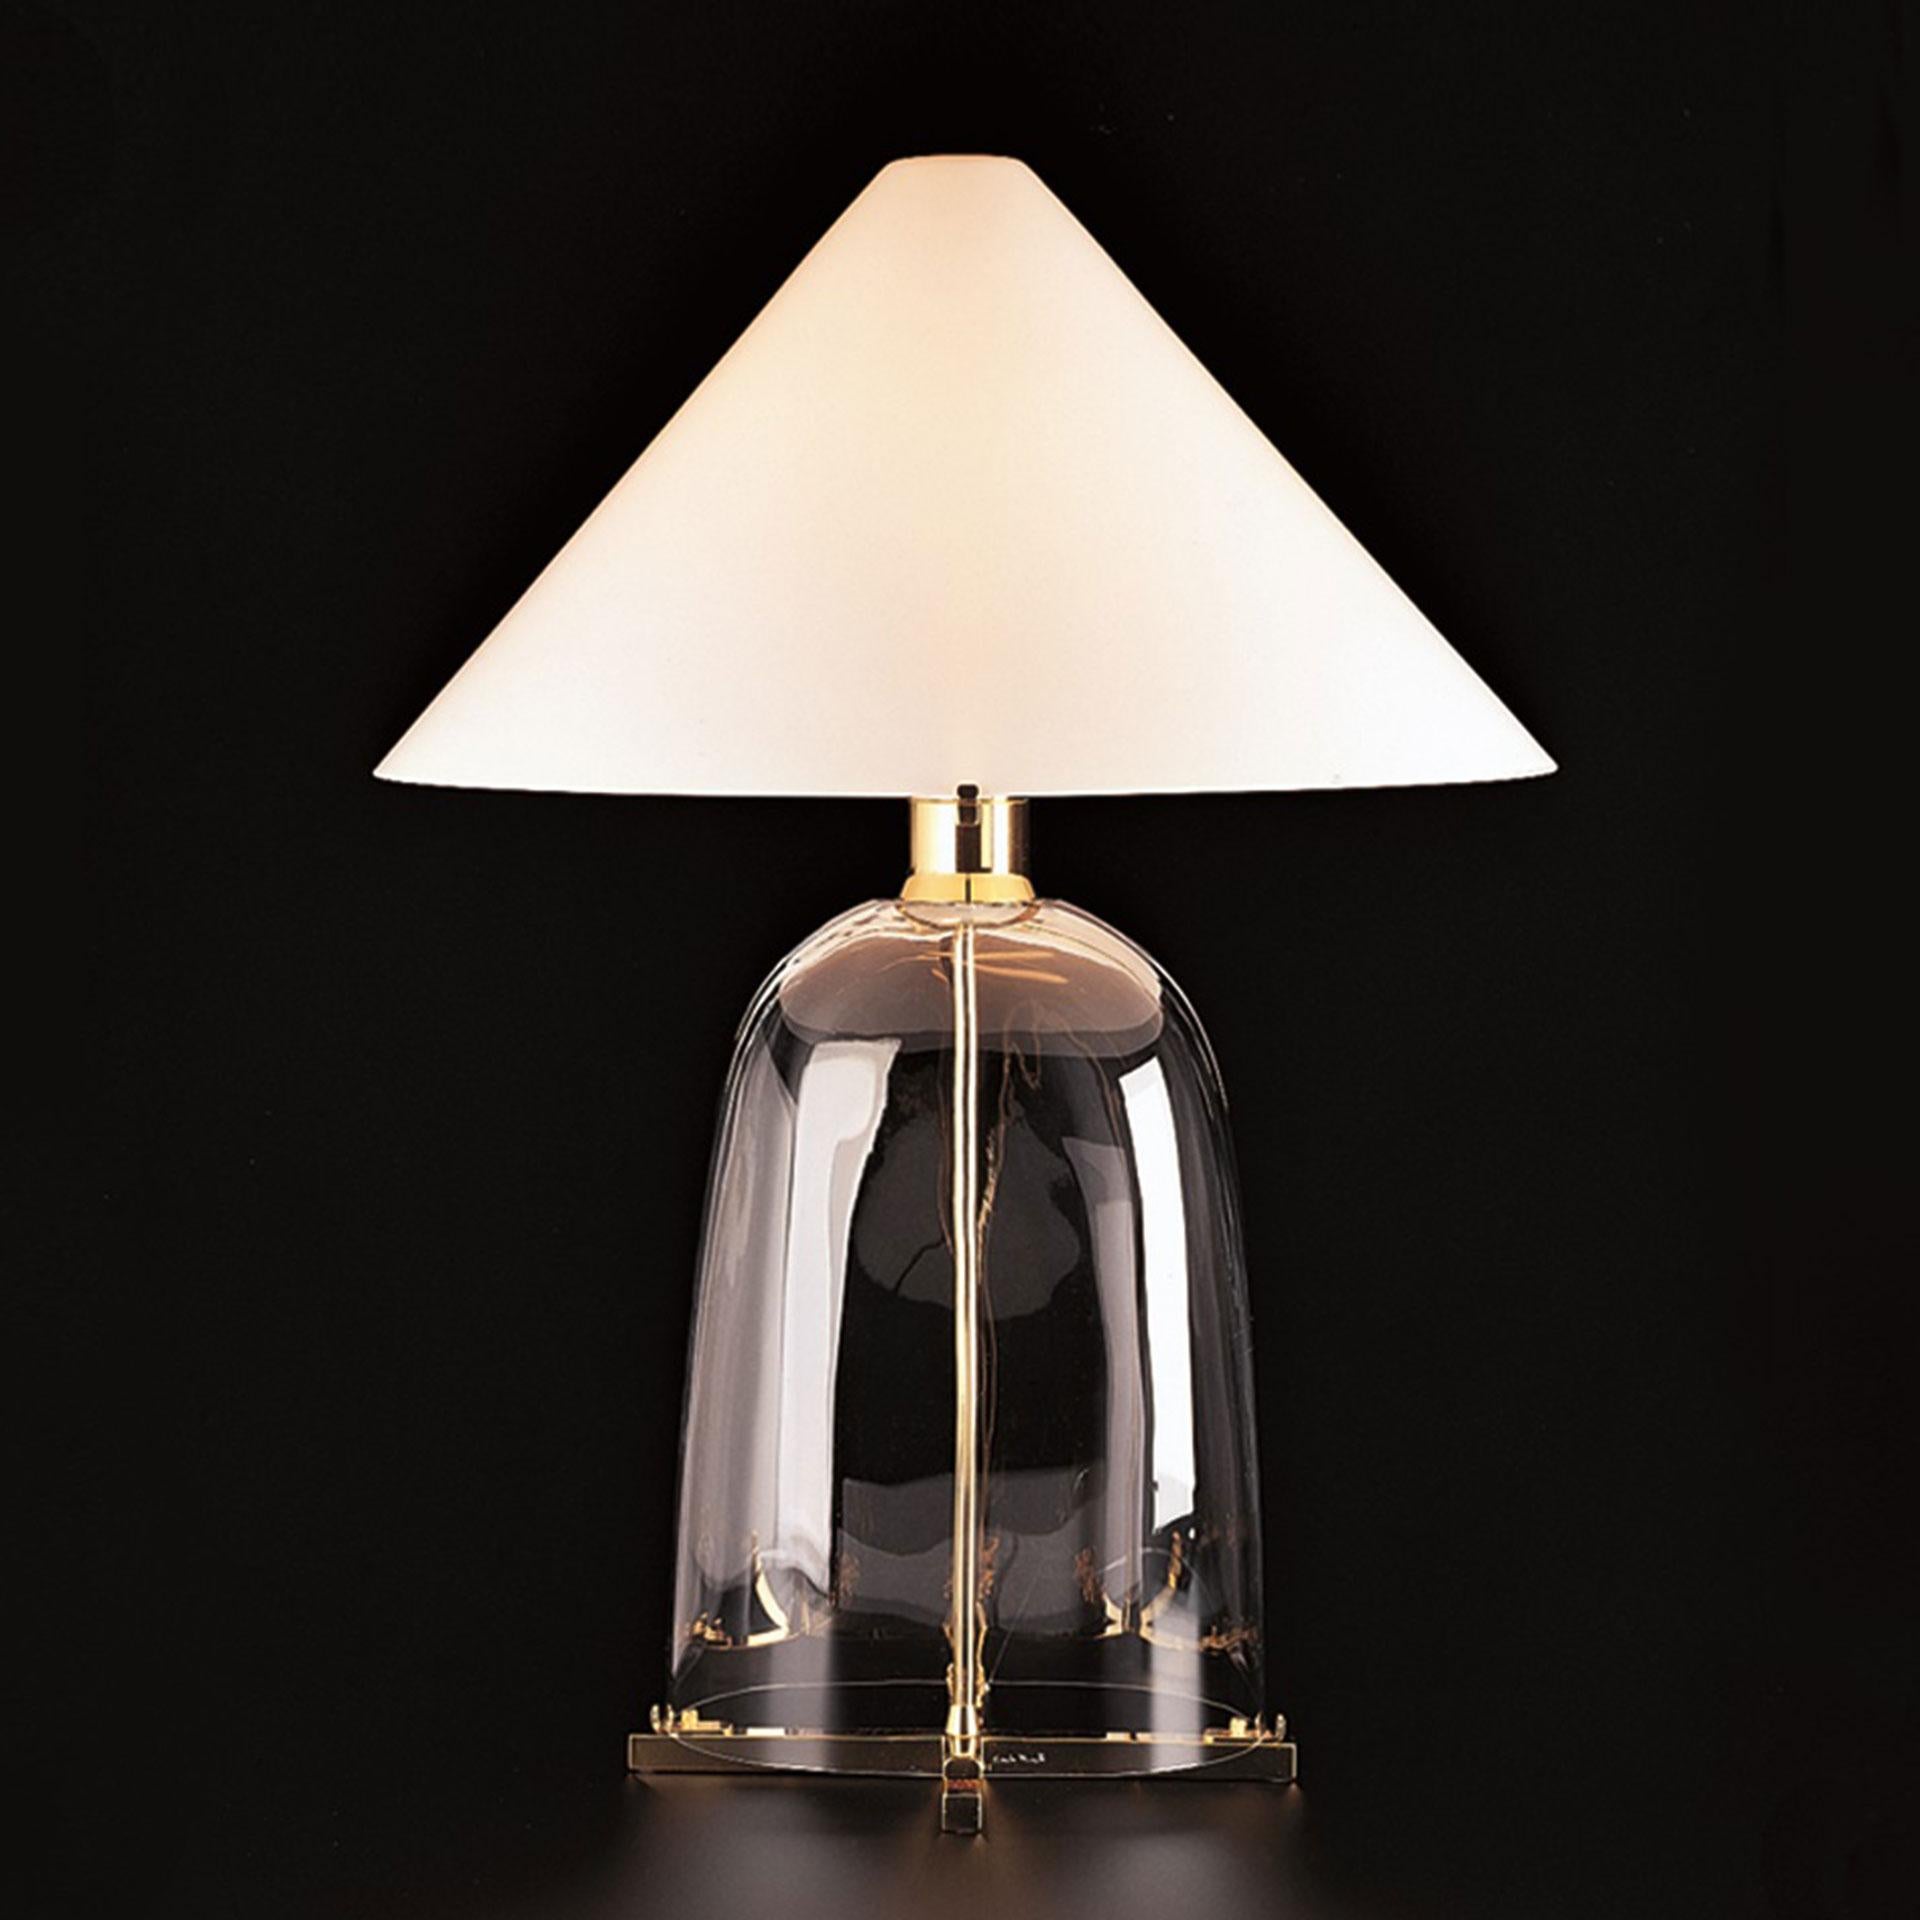 Chosen as one of Architectural Digest “best new lights, 2015”, Ovale is a table lamp of mouth blown Murano glass with mouth blown Murano white opaline glass shade mounted on gilded metal. The lamp was designed in 1983 by Carlo Moretti.